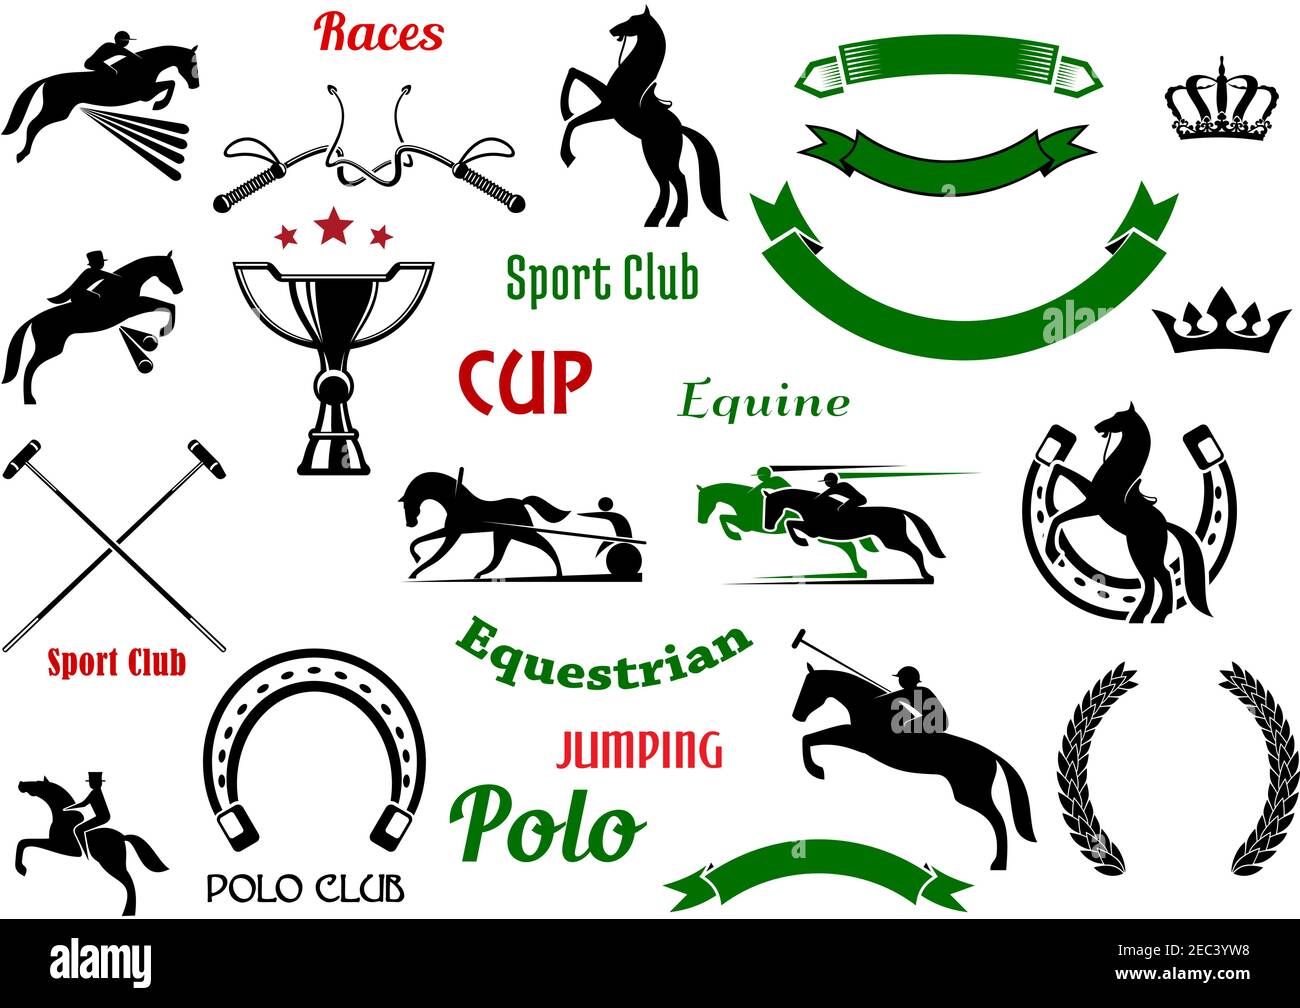 Equestrian and polo club, races and jumping show competition symbols with rearing up and jumping horses, galloping race horses with riders, trophy cup Stock Vector